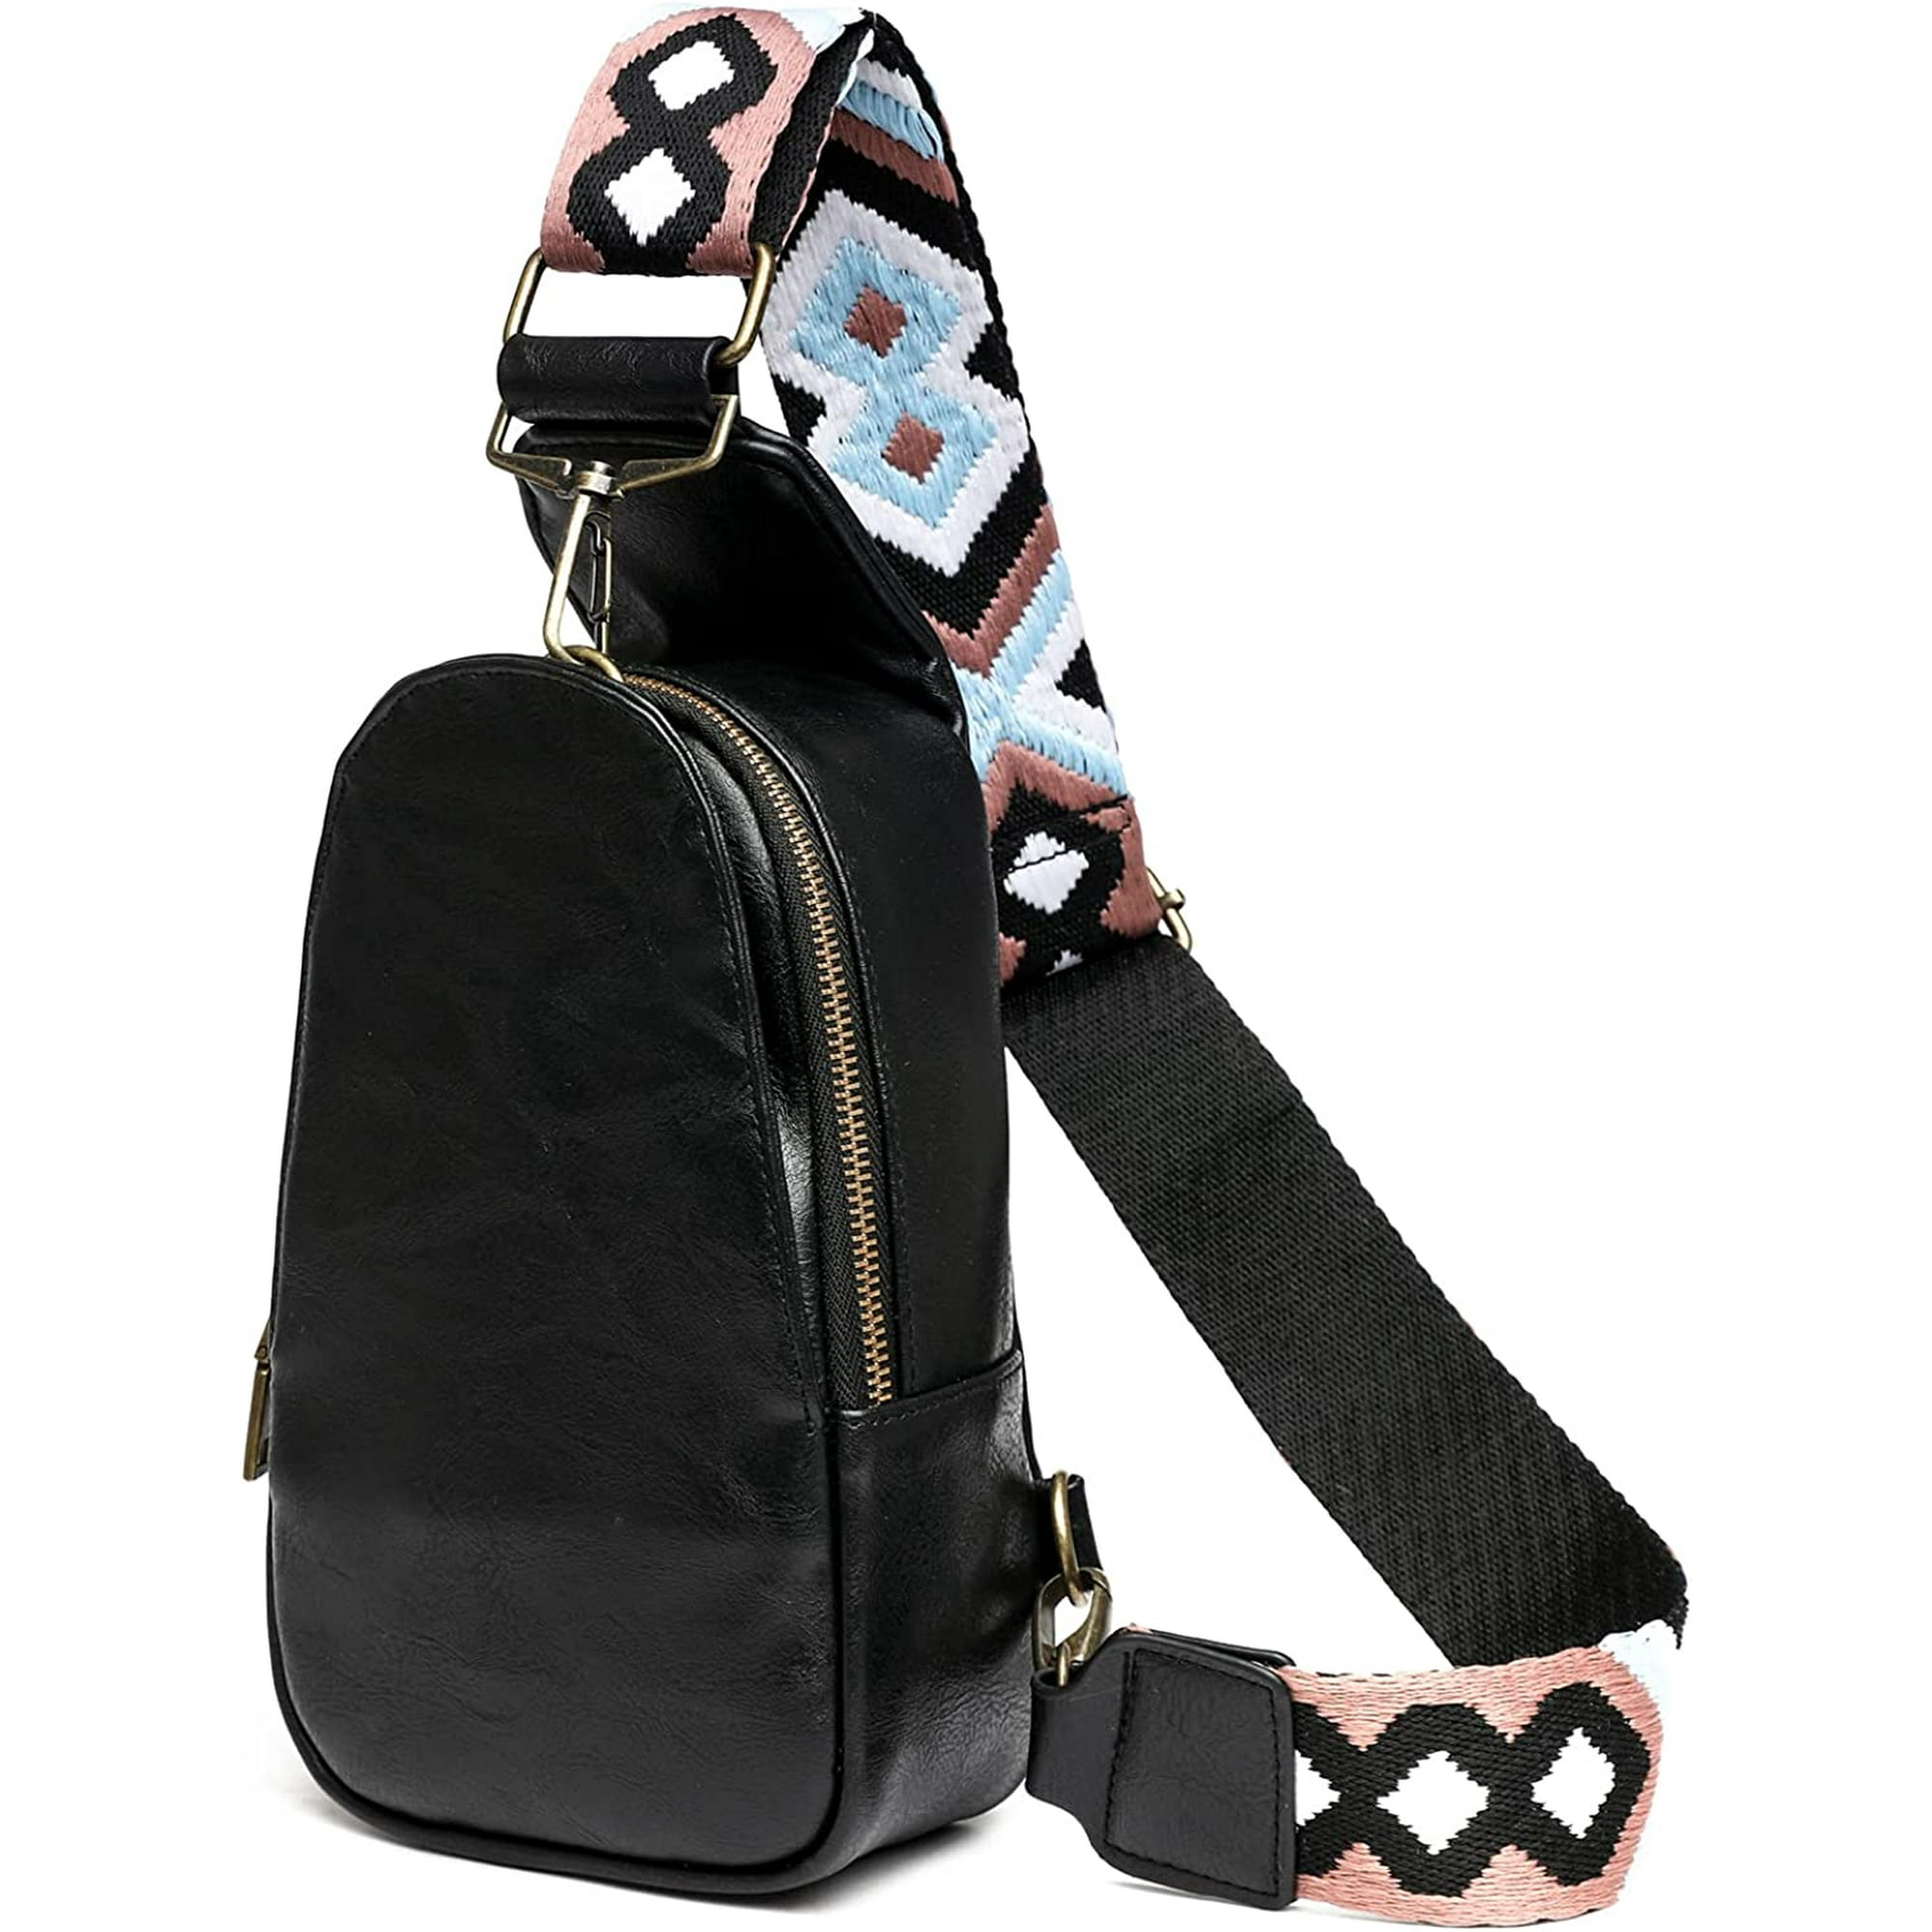  Mai Woven Bag Strap - Blue & Pink with Black Leather, Purse  Strap, Hand Woven Bag Strap, Embroidered Crossbody Strap, Guitar Strap :  Handmade Products